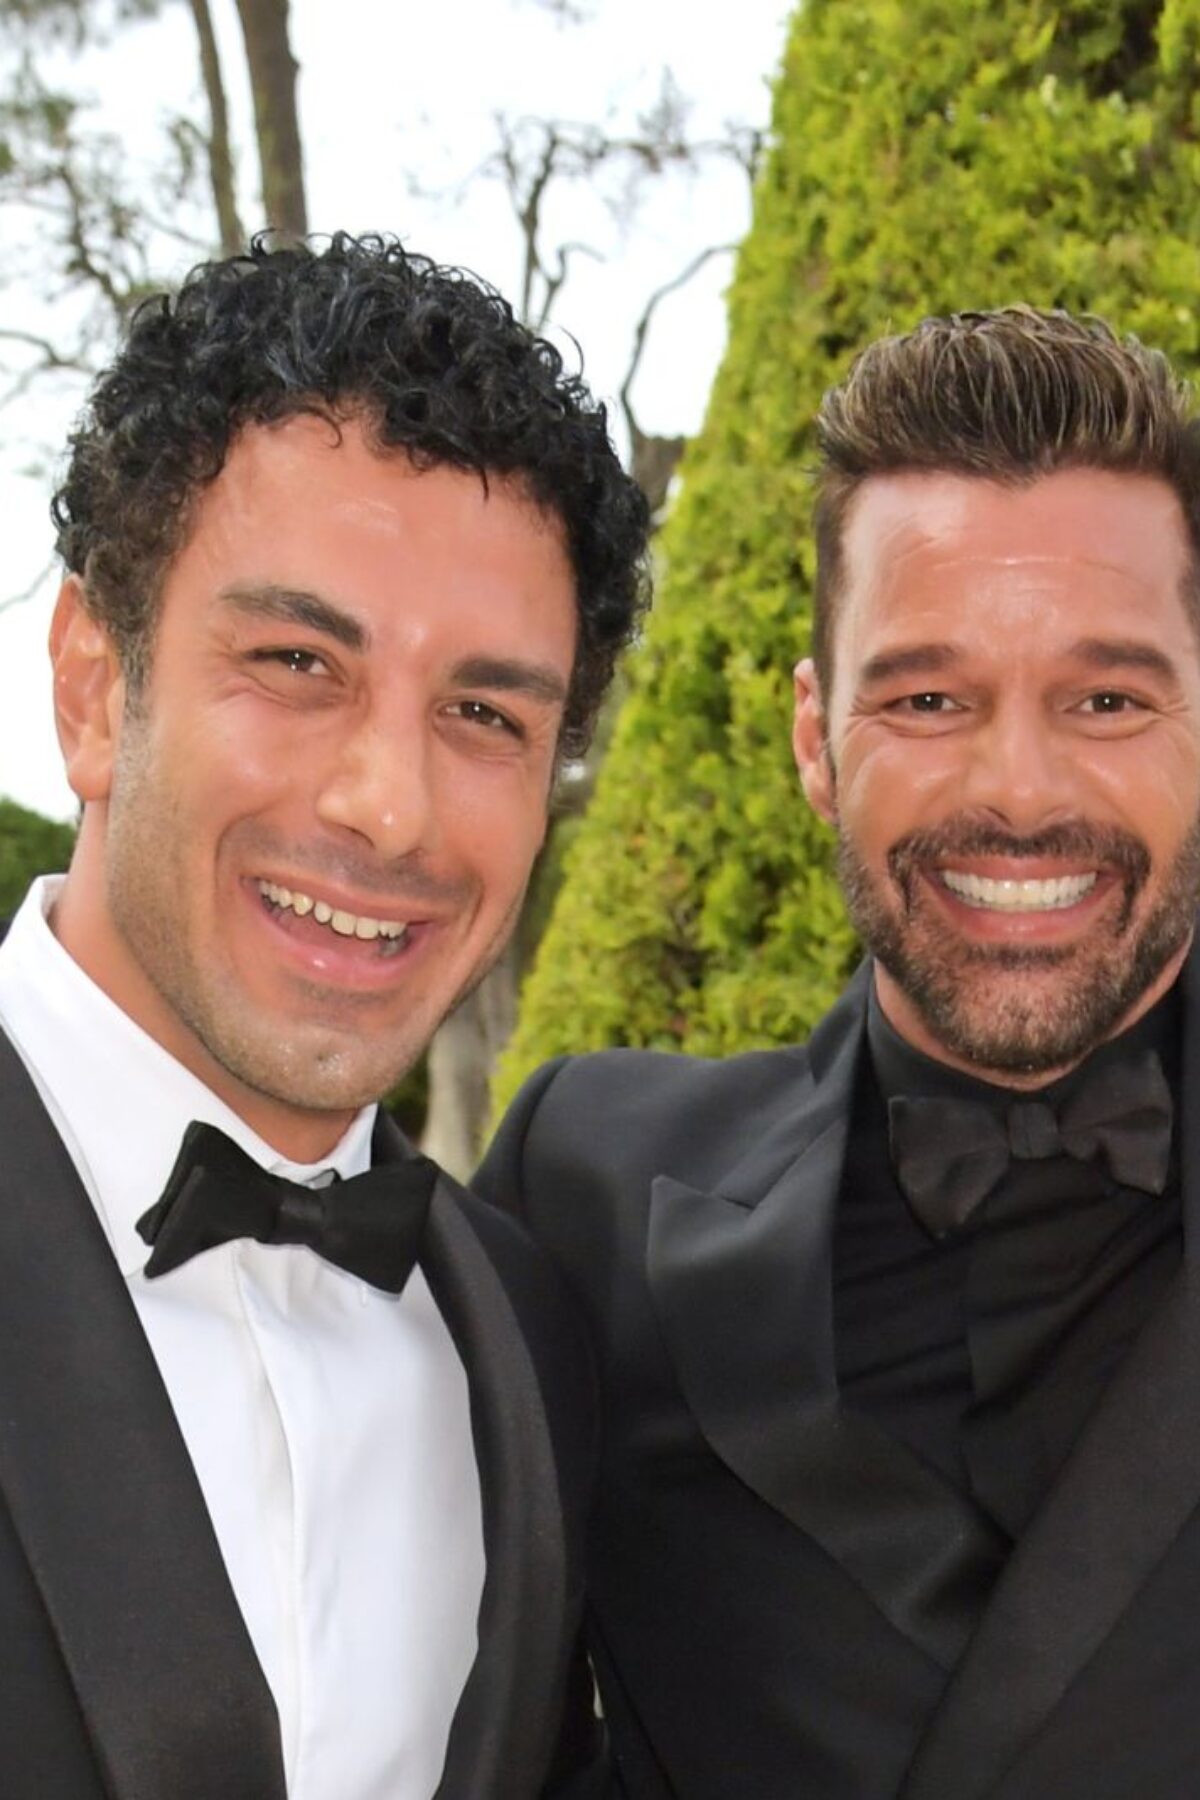 CAP D'ANTIBES, FRANCE - MAY 26: (L-R) Jwan Yosef, Ricky Martin and Baz Luhrmann attend the amfAR Gala Cannes 2022 at the Hotel du Cap-Eden-Roc on May 26, 2022 in Cap d'Antibes, Côte d'Azur. (Photo by Dave Benett/amfAR/Dave Benett/Getty Images)